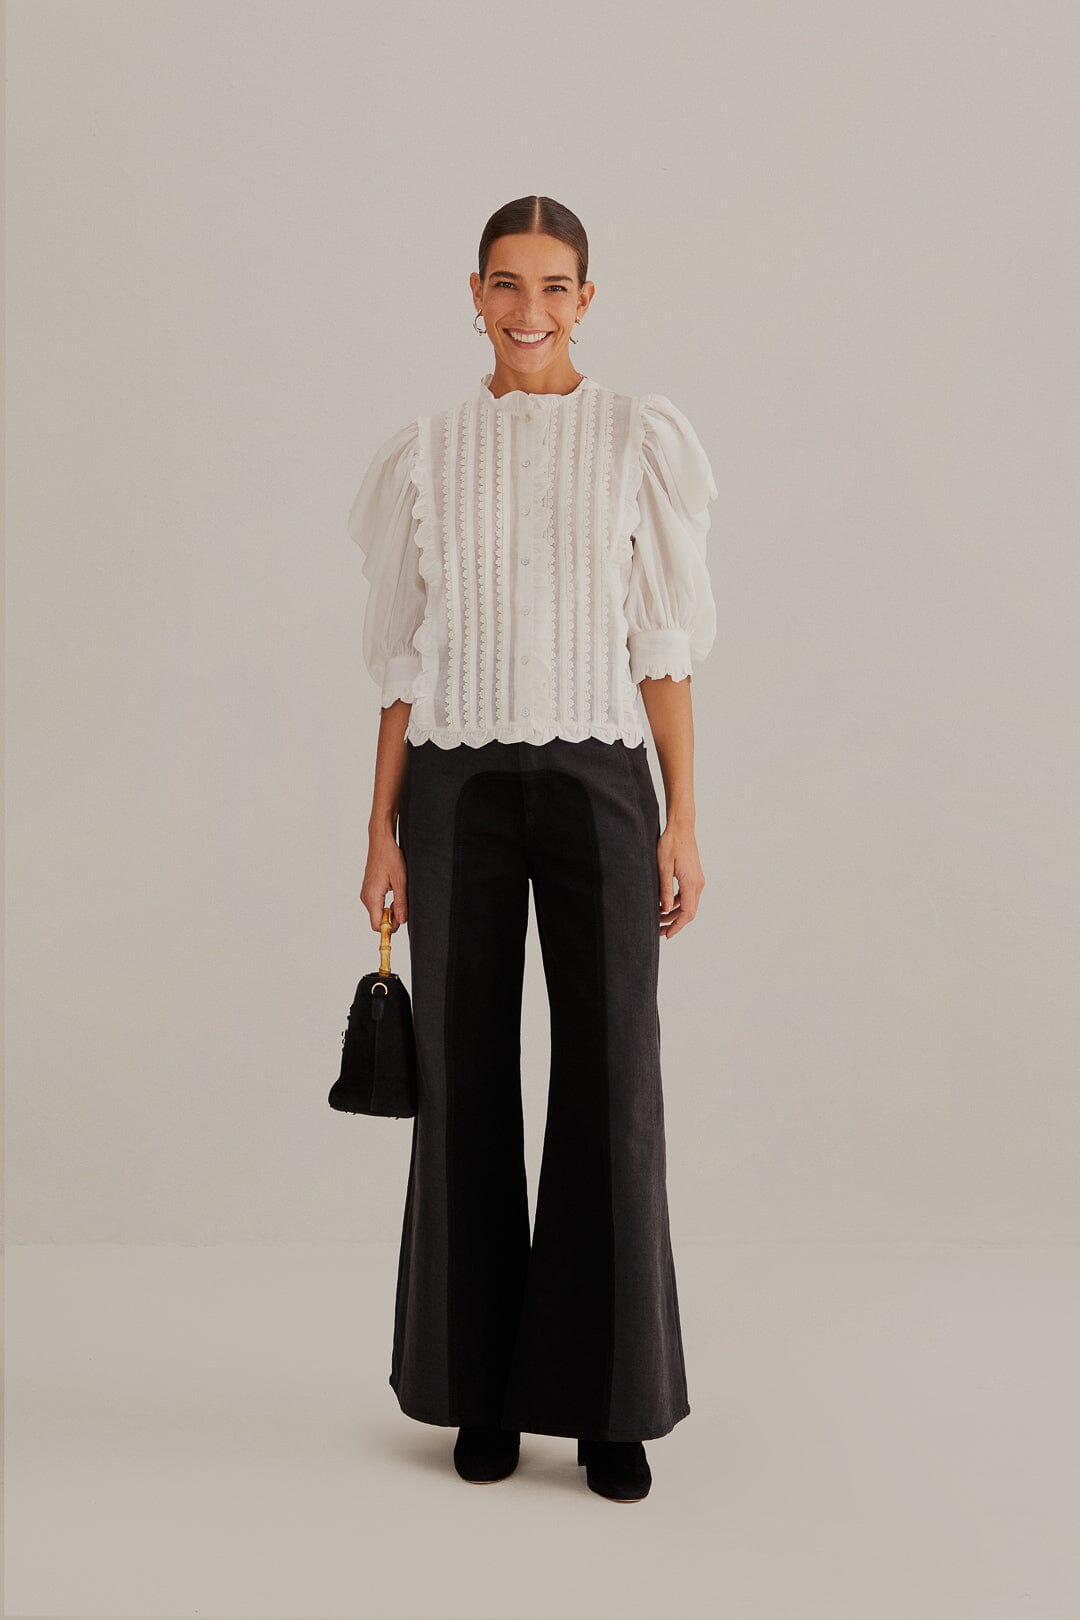 Off-White Short Sleeve Pleated Blouse